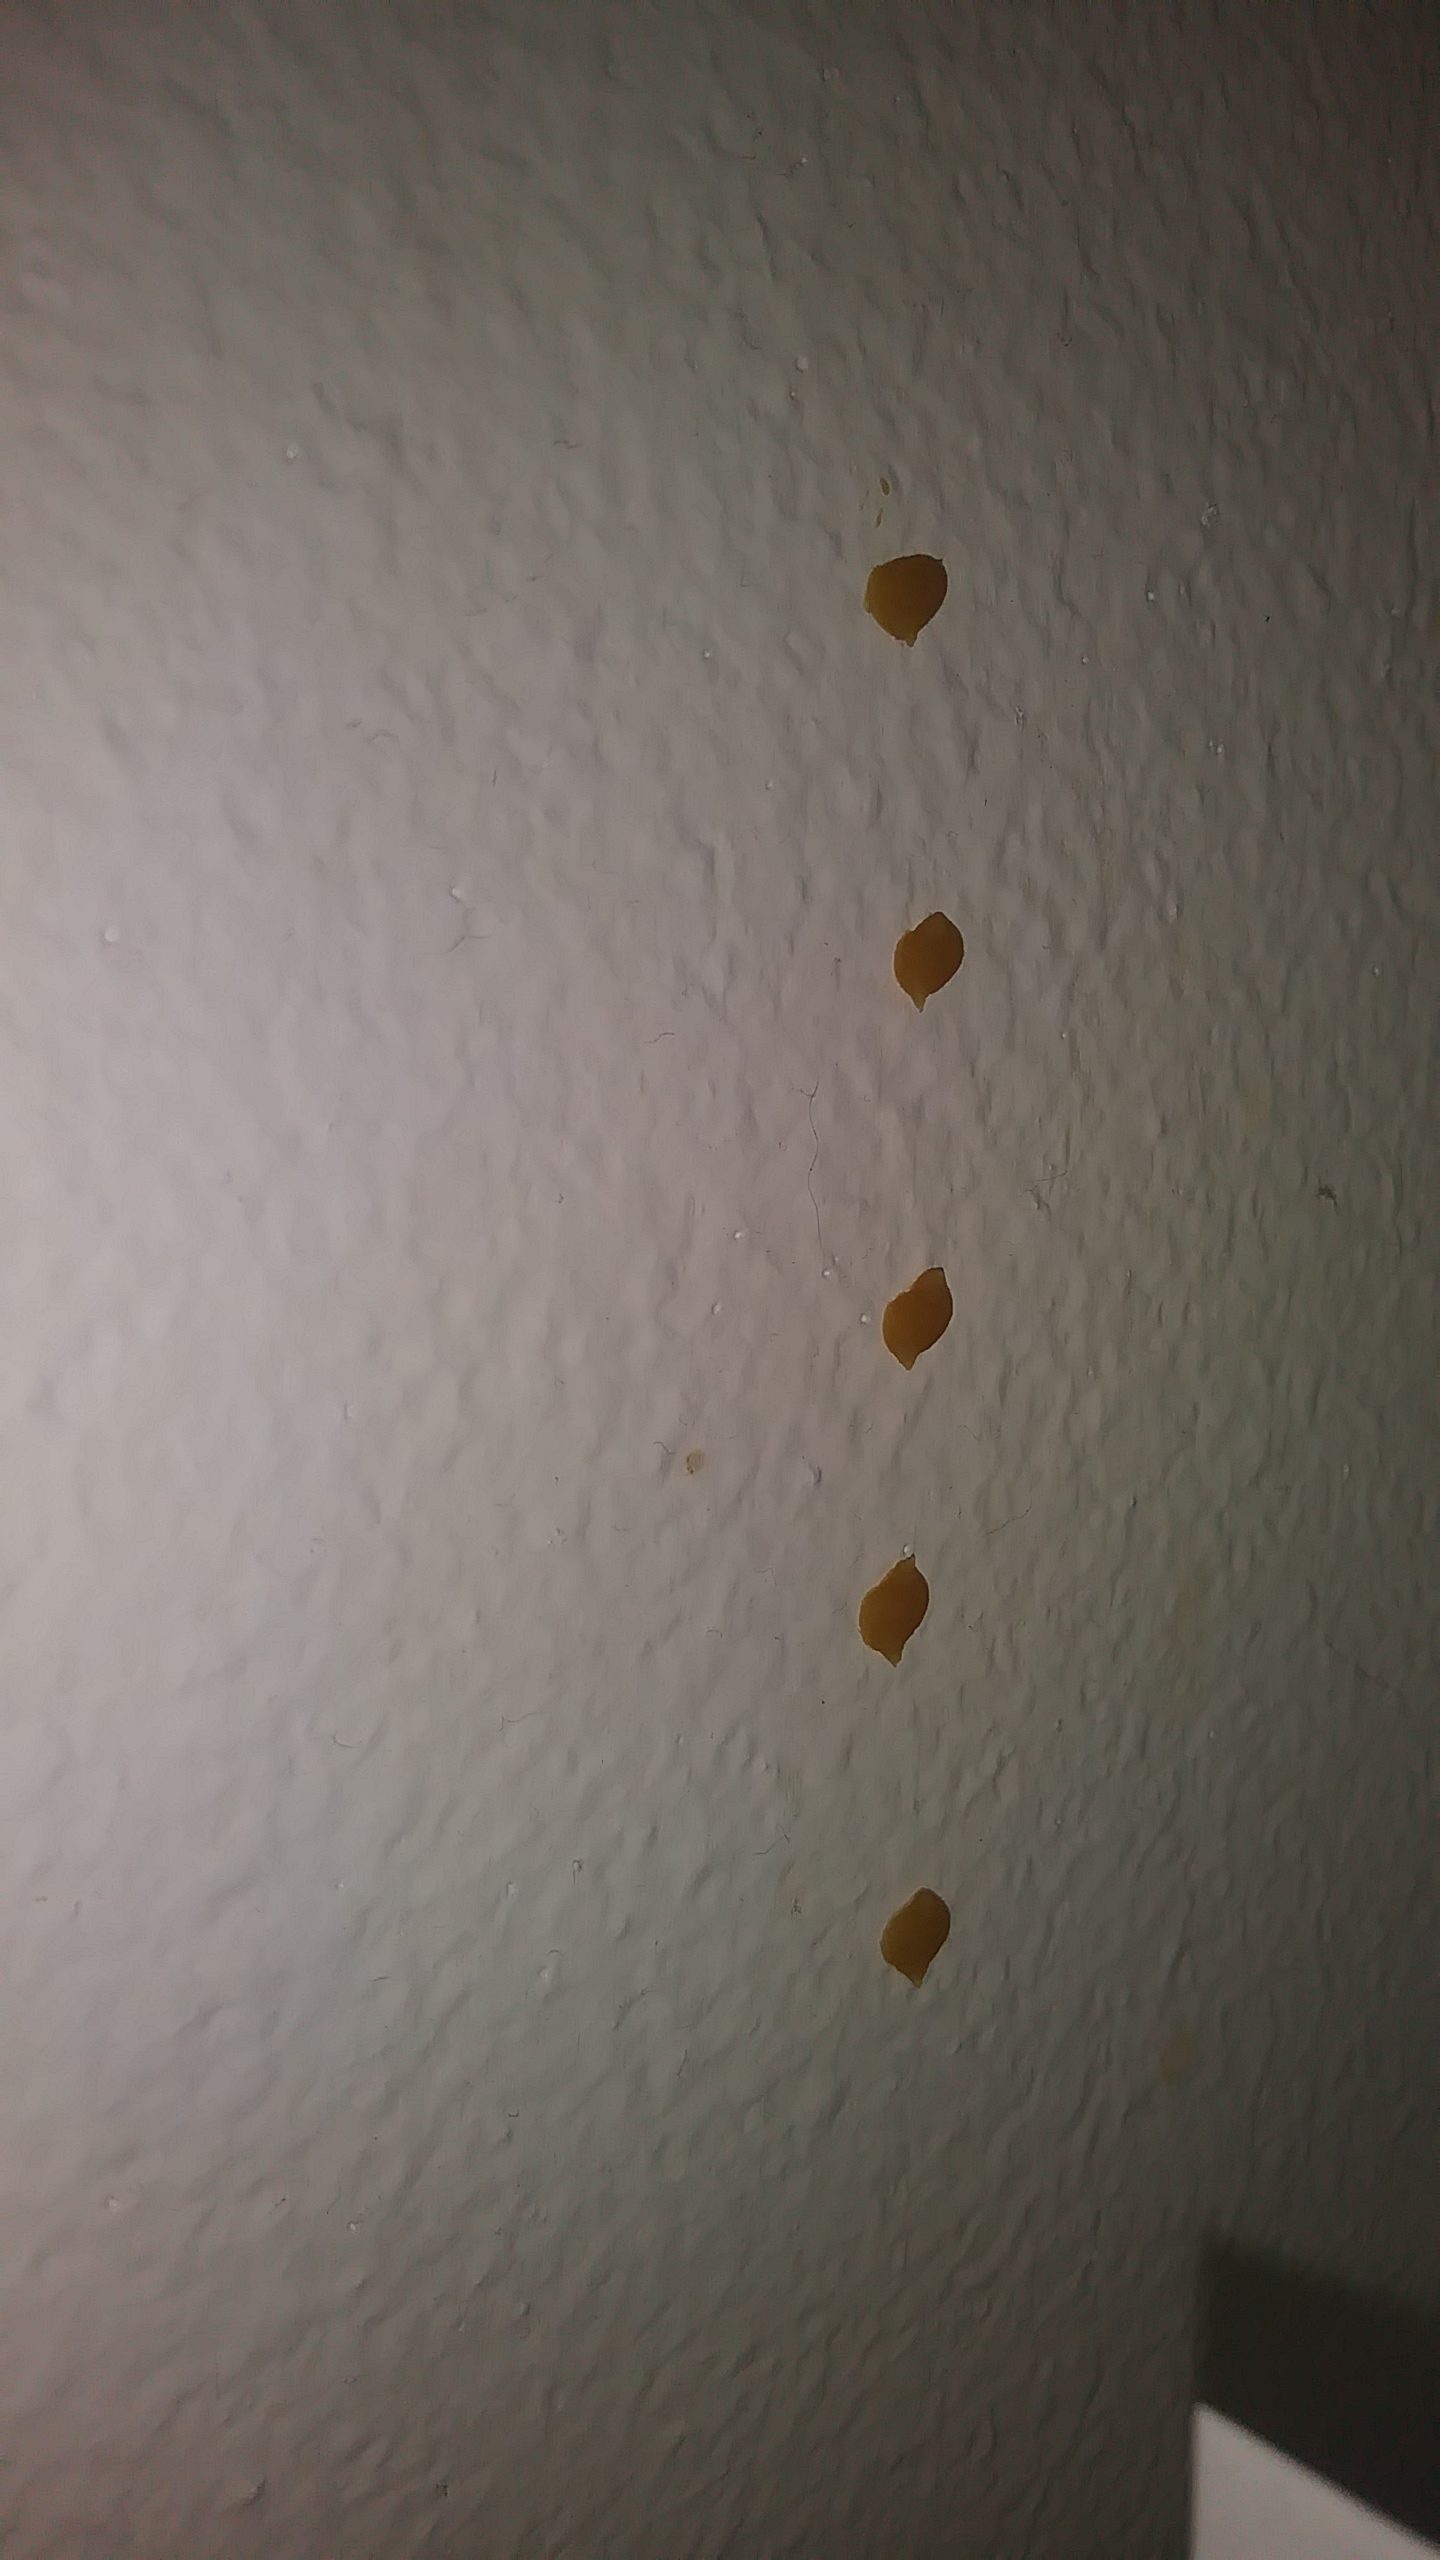 Yellow Sap Like Substance On Inside Walls Redflagdeals Com Forums - Yellow Substance On Bathroom Walls